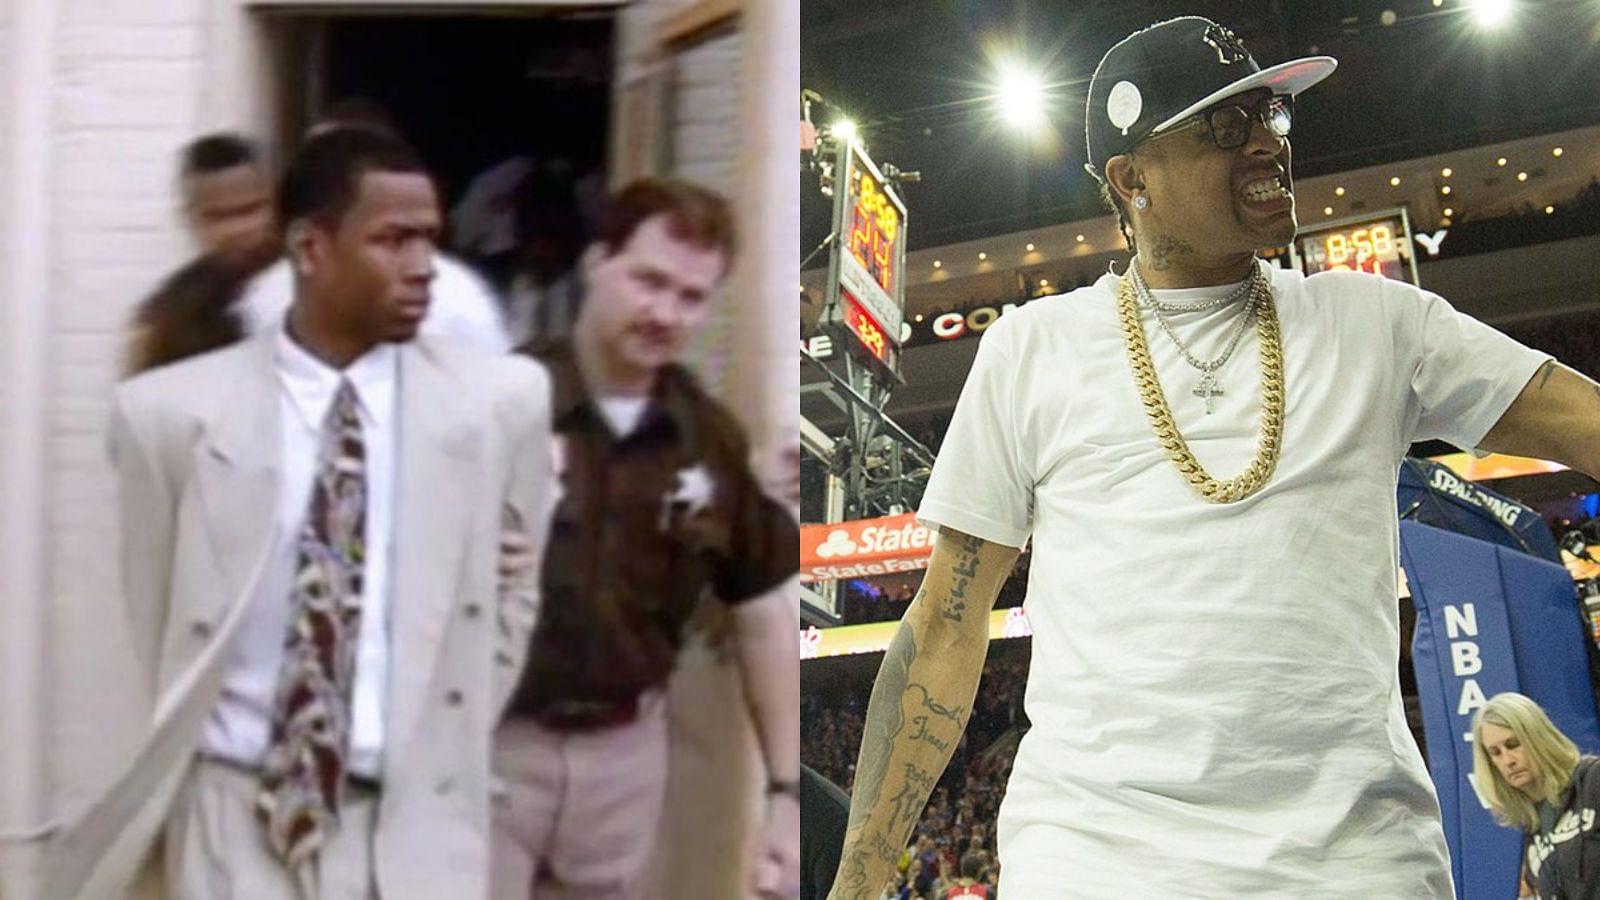 “Take My Lamborghini, I Have 10 More”: Allen Iverson, Who Lost Over $200 Million, Once Mocked a Policeman For His Salary